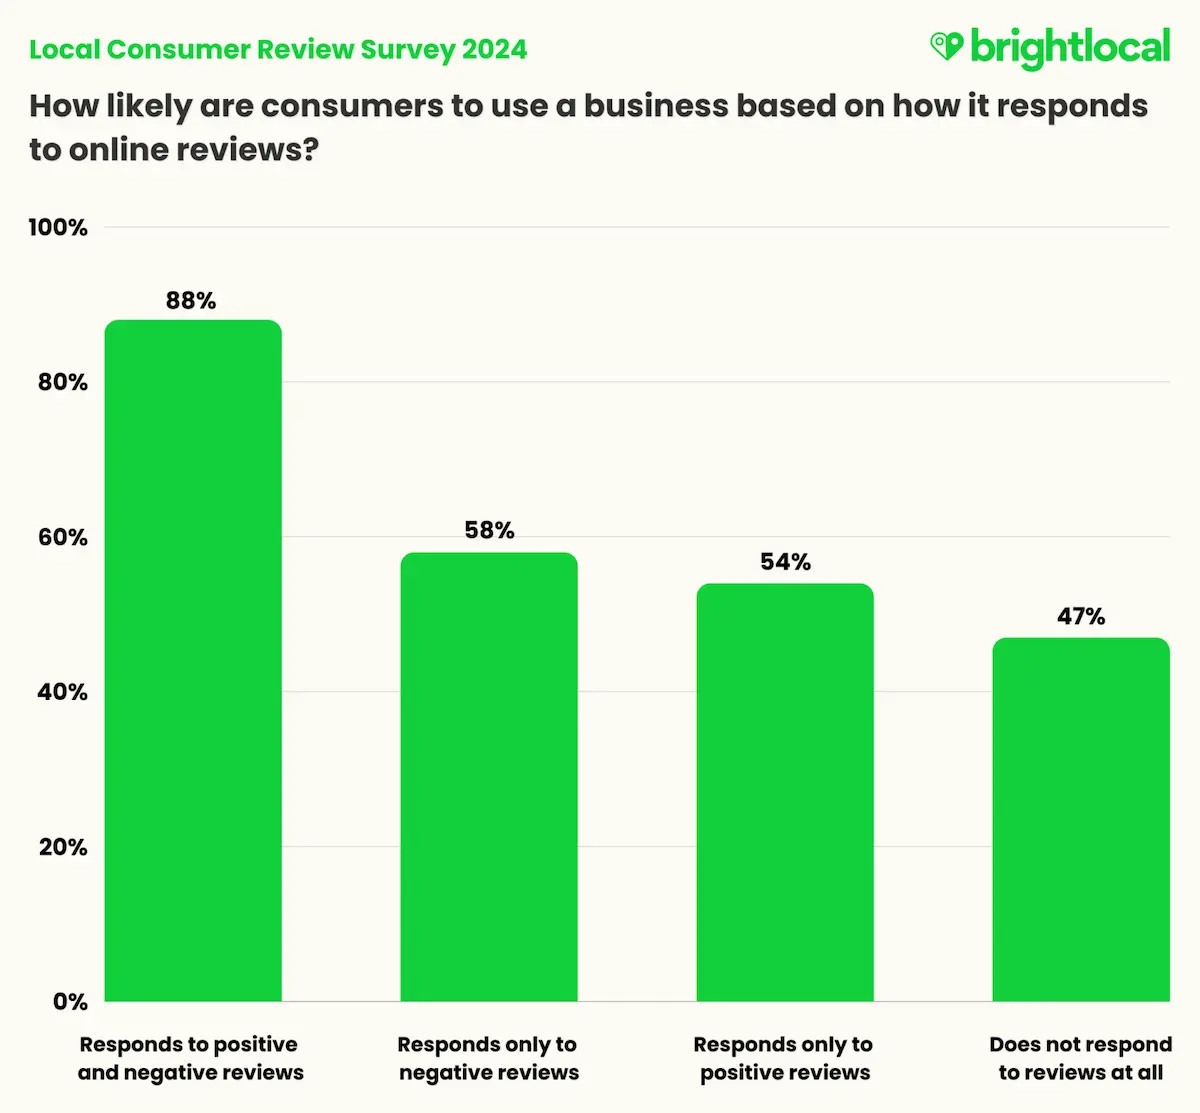 importance of reviews - brightlocal.webp